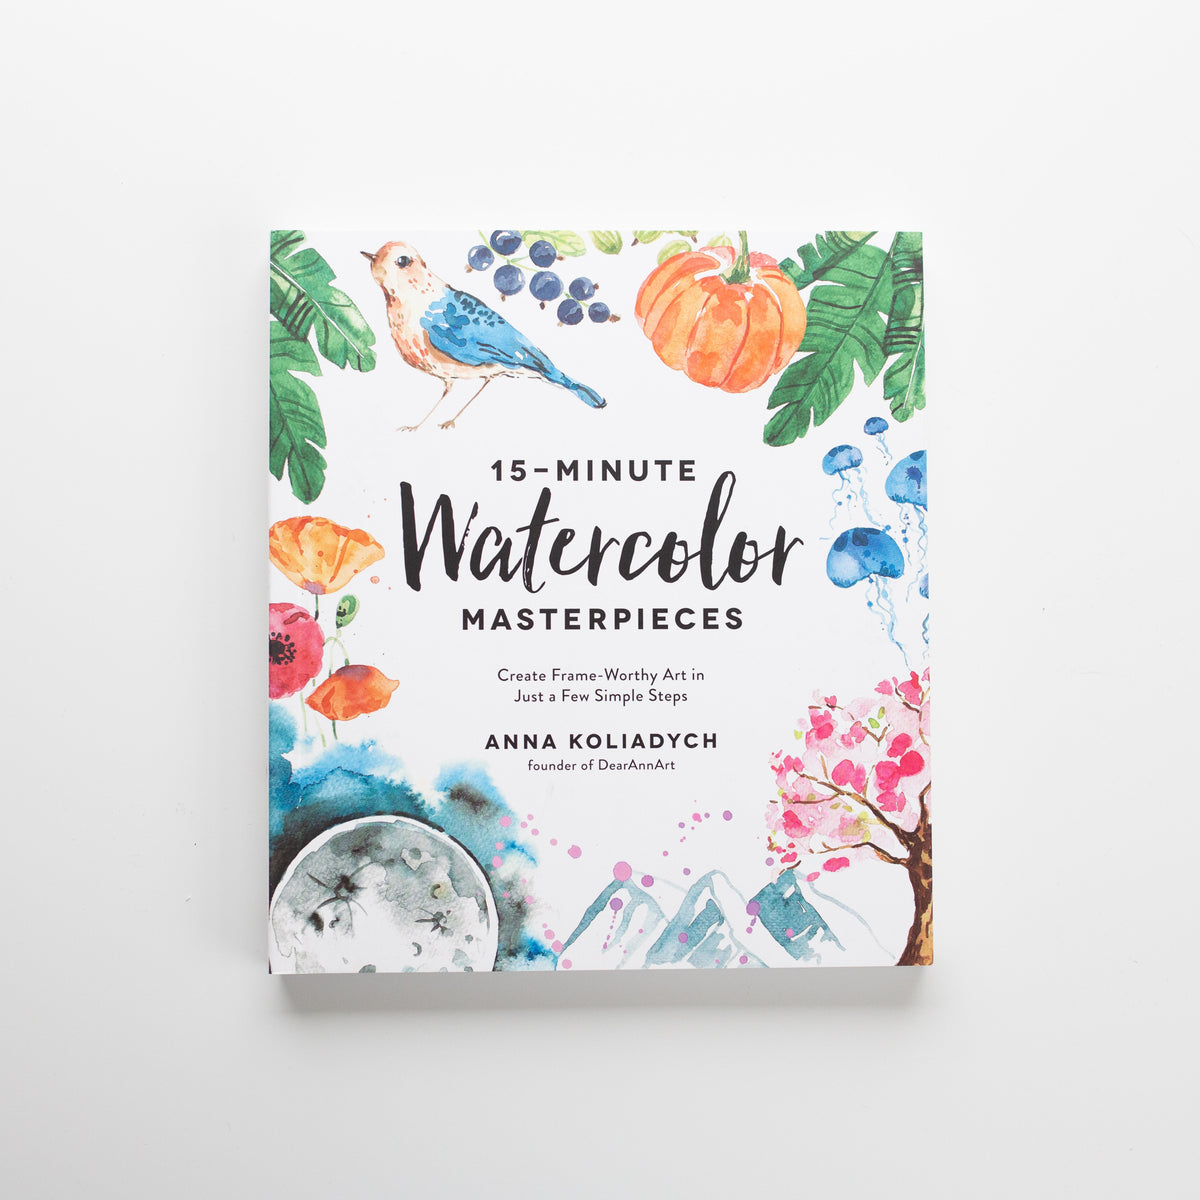 15 Minute Watercolor Masterpieces' by Anna Koliadych